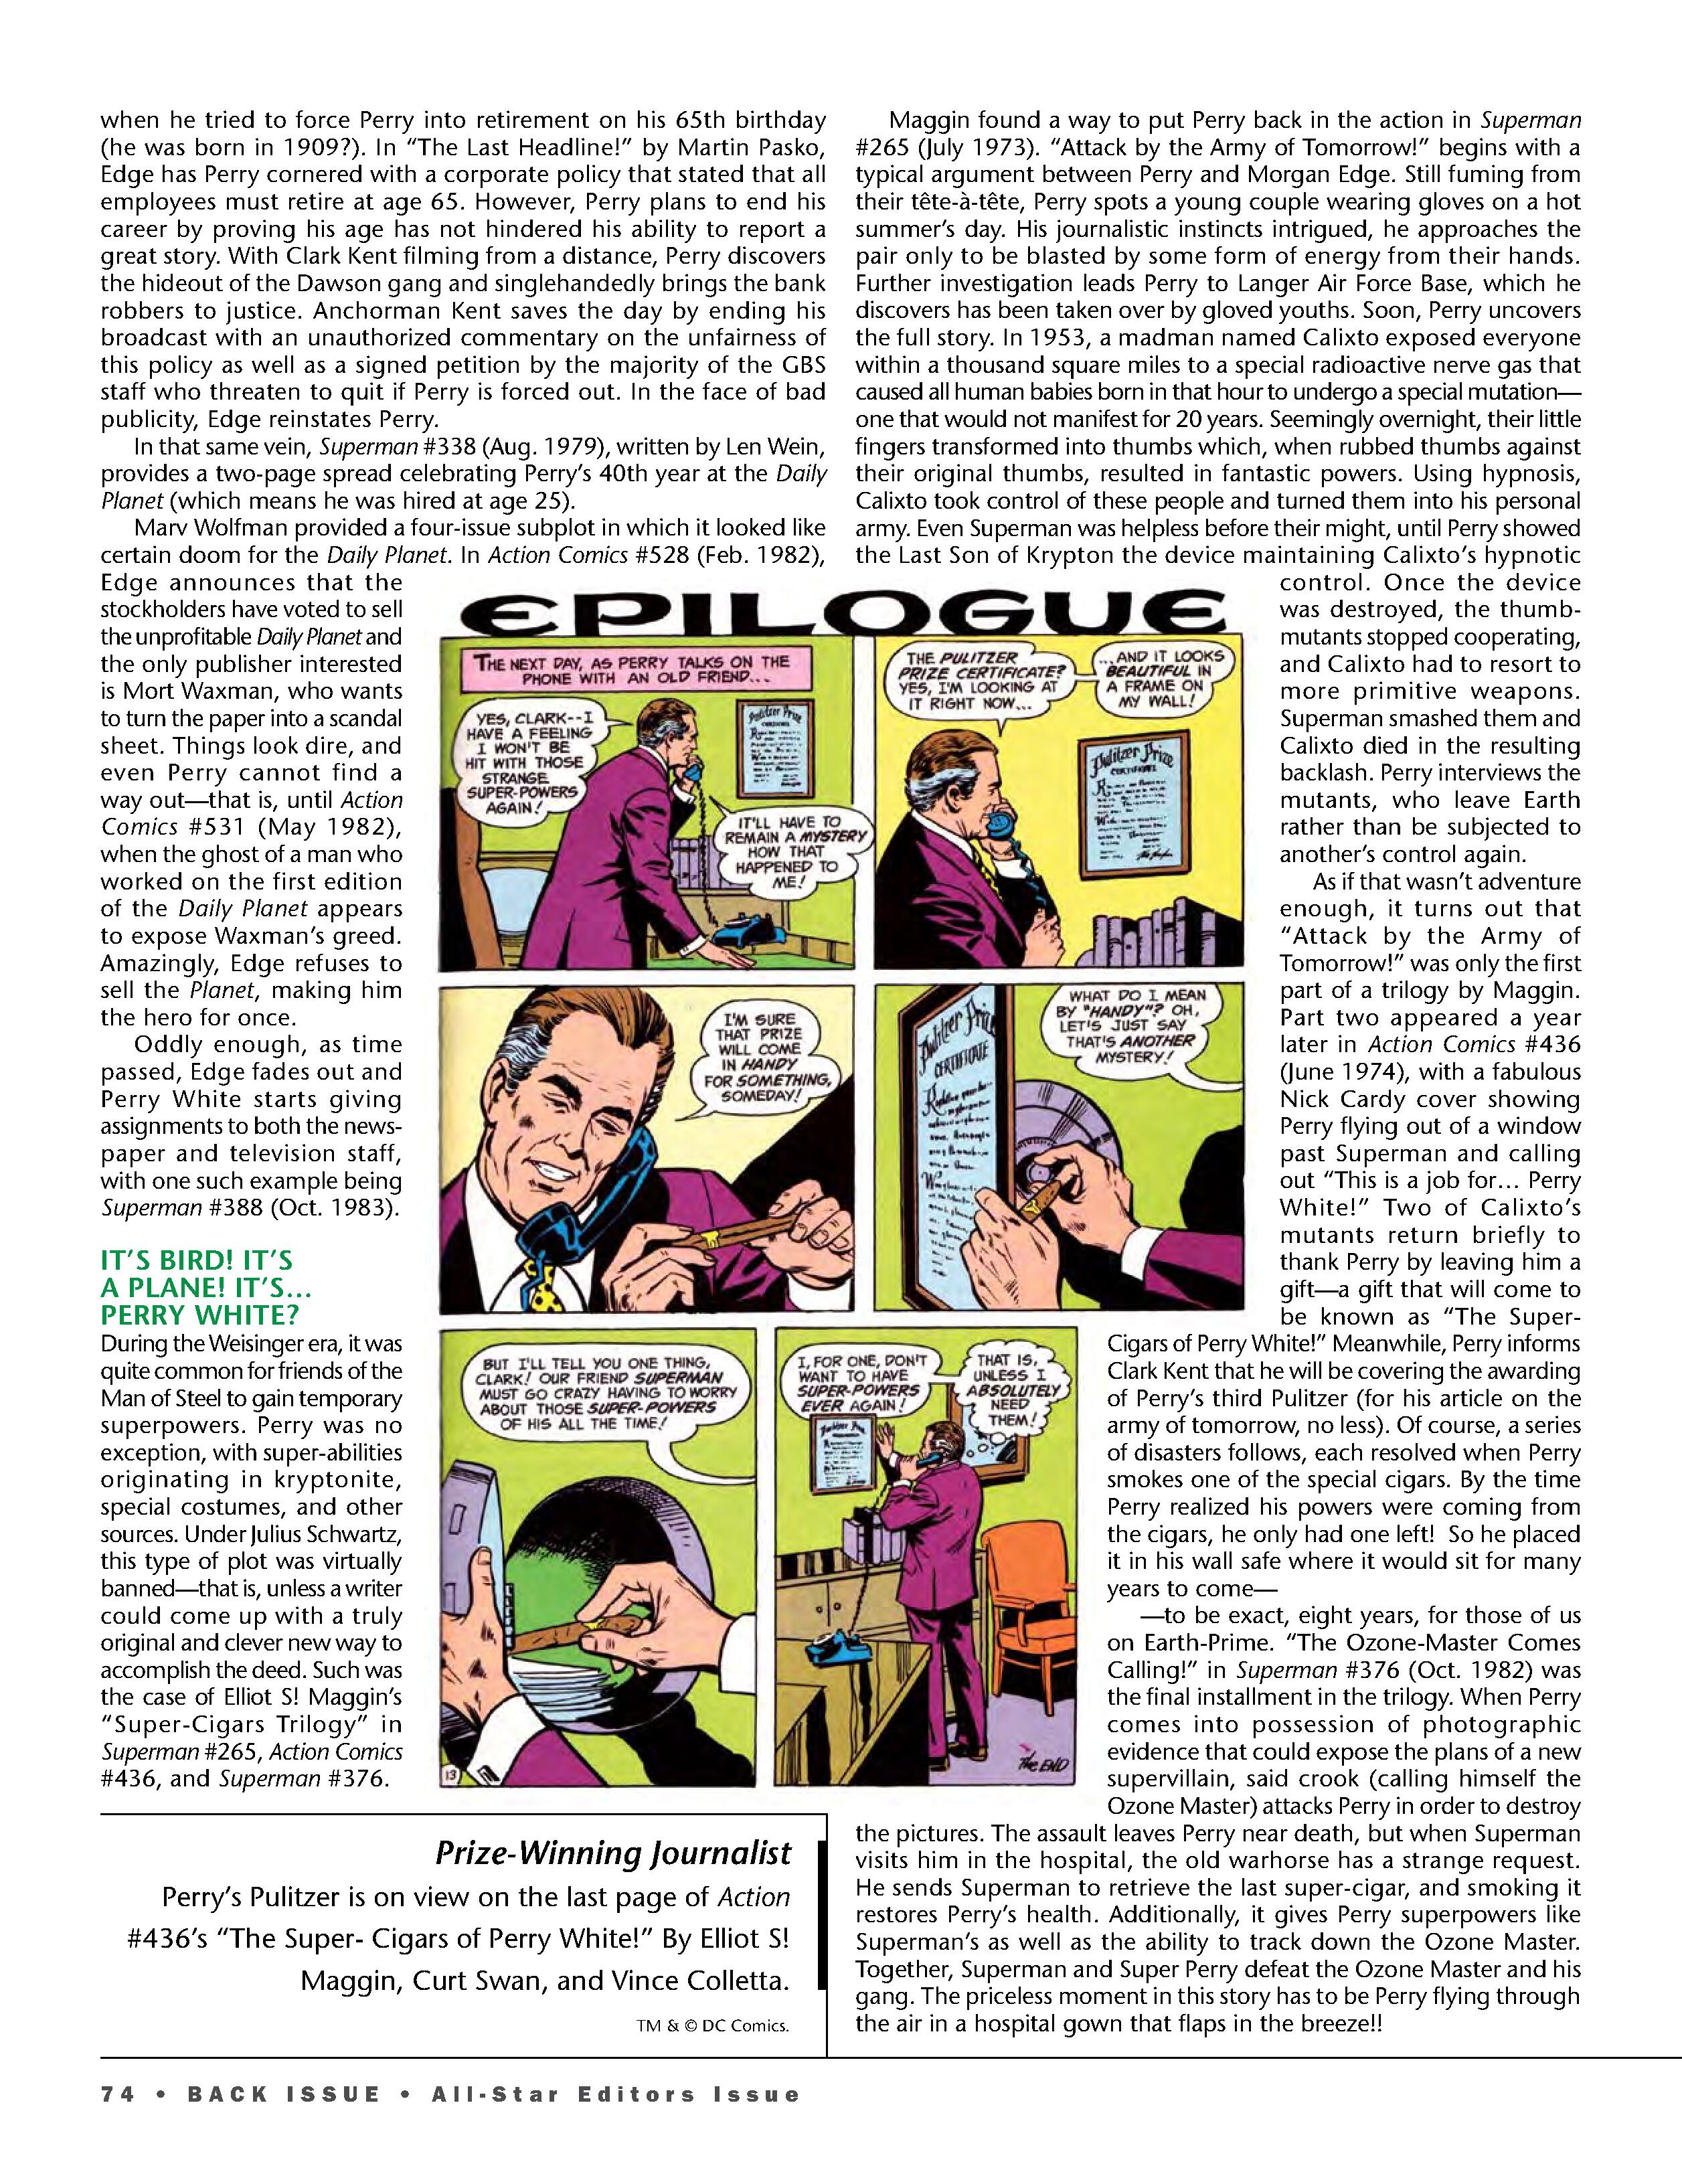 Read online Back Issue comic -  Issue #103 - 76